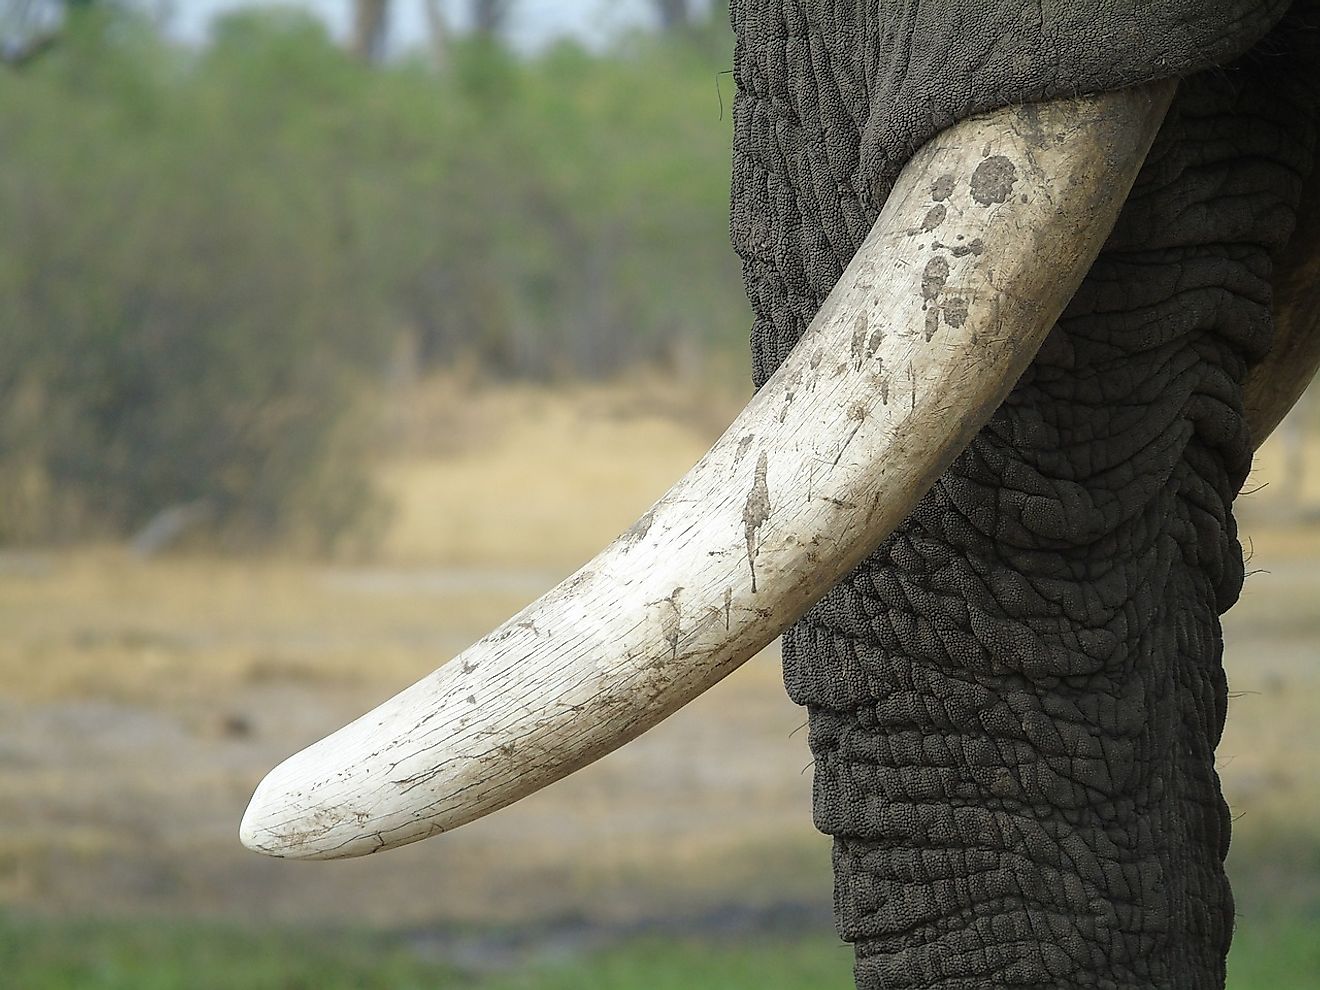 Elephants are killed for their tusks. Image credit: Needpix.com